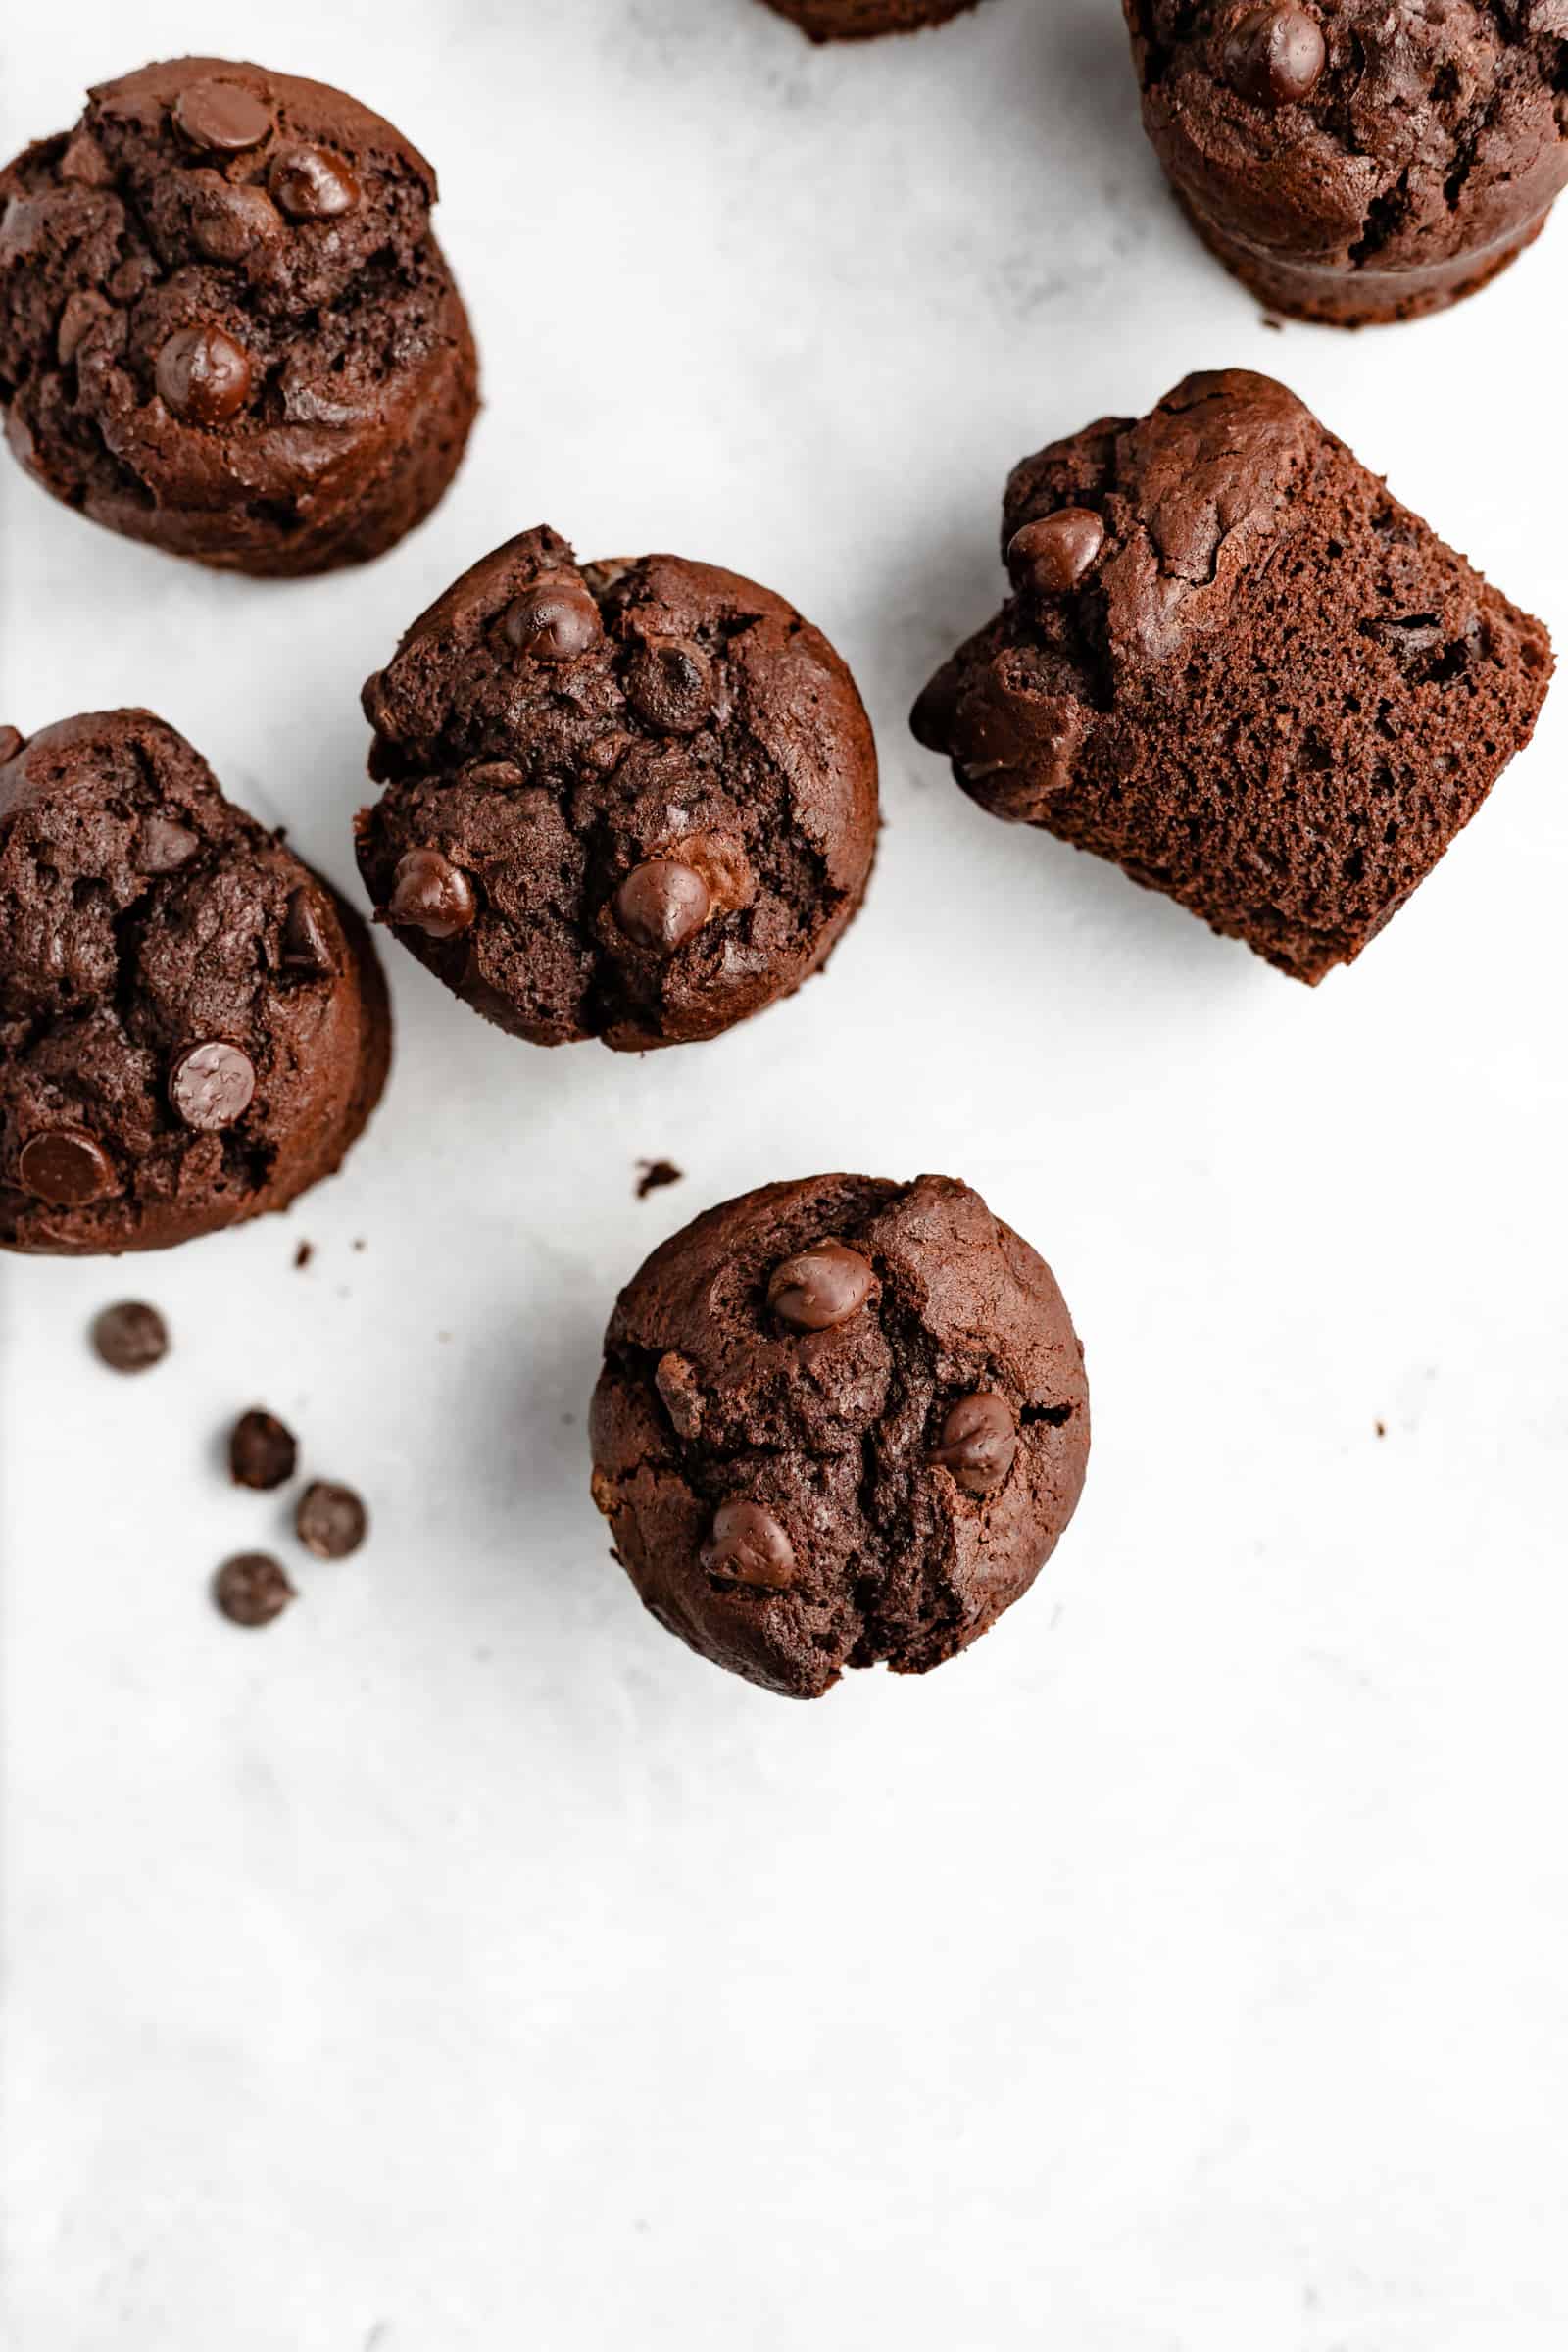 How to Make Triple Chocolate Muffins